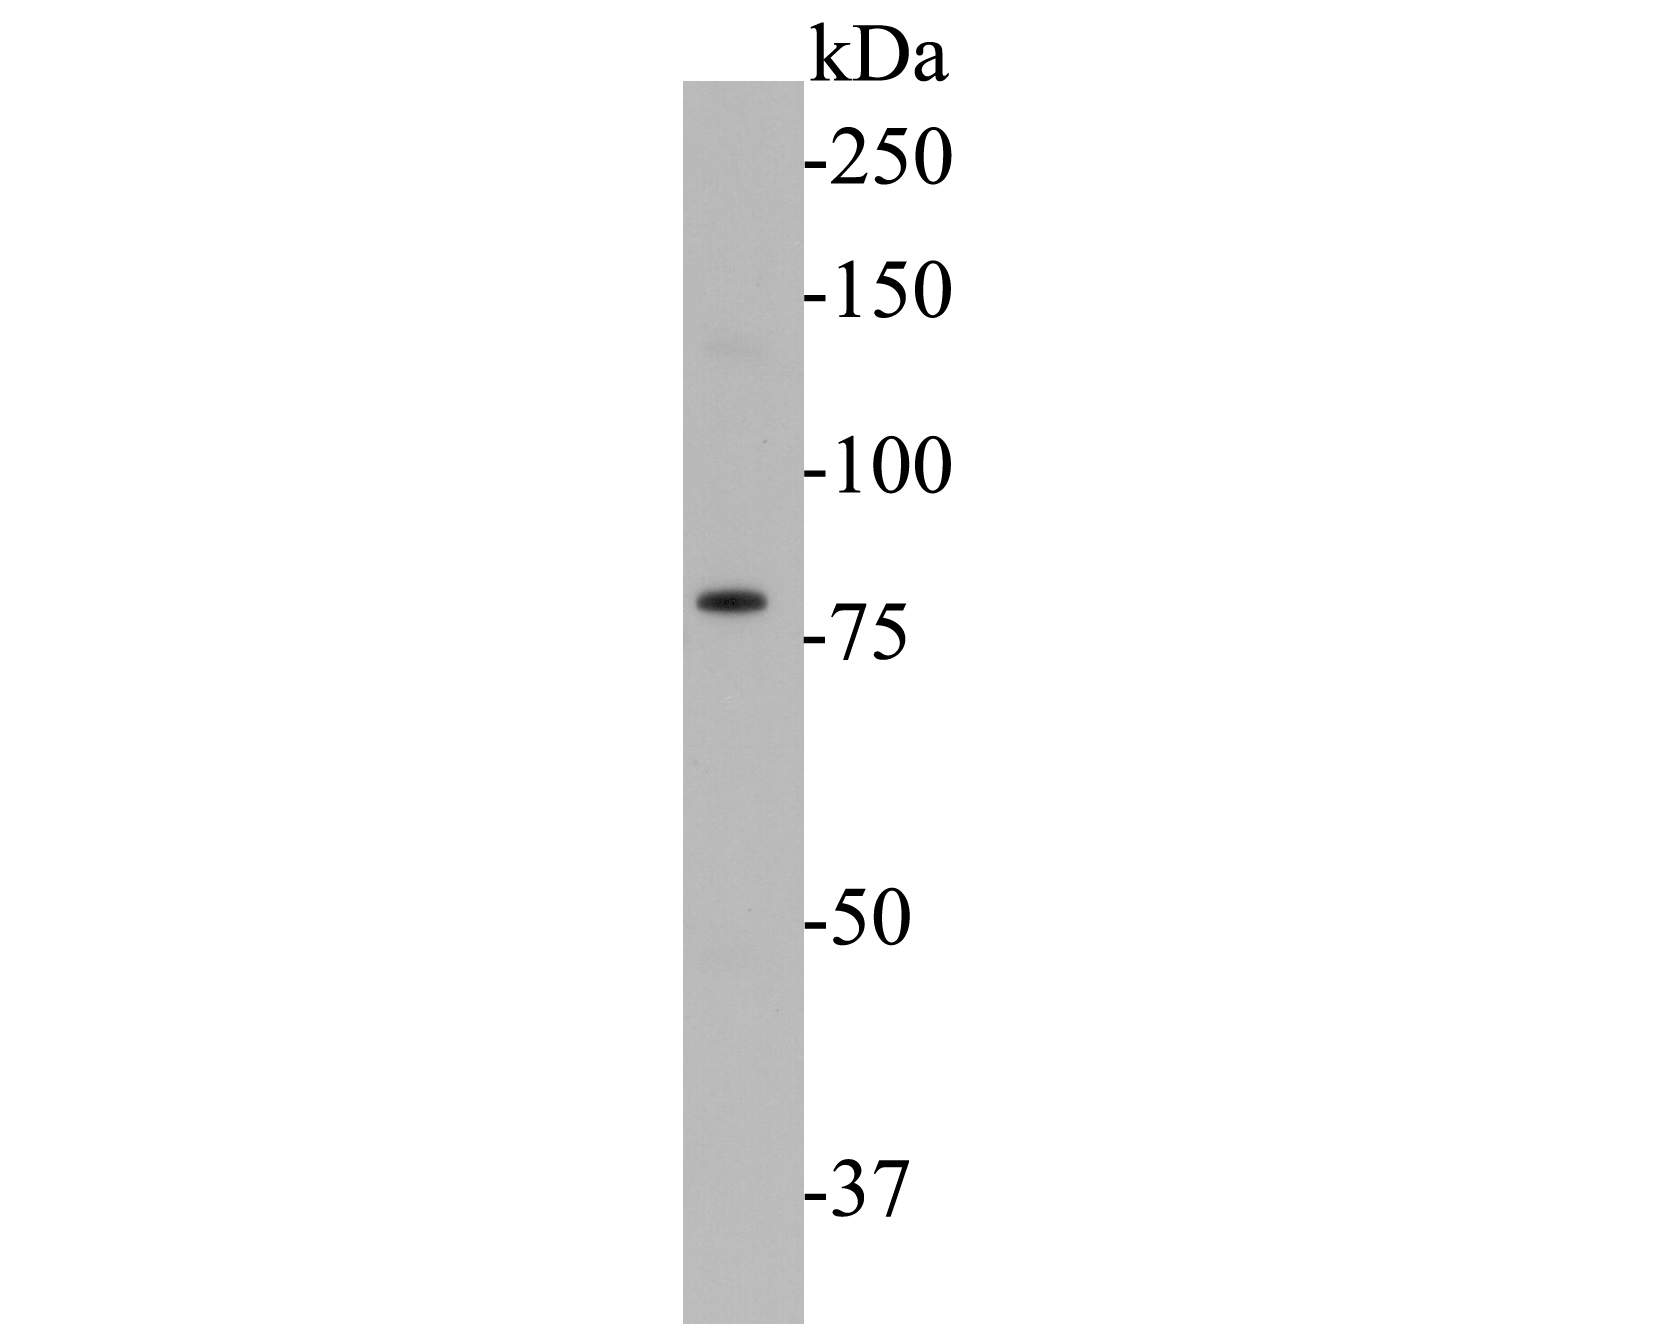 Western blot analysis of KV1.1 on rat brain tissue lysate. Proteins were transferred to a PVDF membrane and blocked with 5% BSA in PBS for 1 hour at room temperature. The primary antibody (ER1901-23, 1/500) was used in 5% BSA at room temperature for 2 hours. Goat Anti-Rabbit IgG - HRP Secondary Antibody (HA1001) at 1:5,000 dilution was used for 1 hour at room temperature.